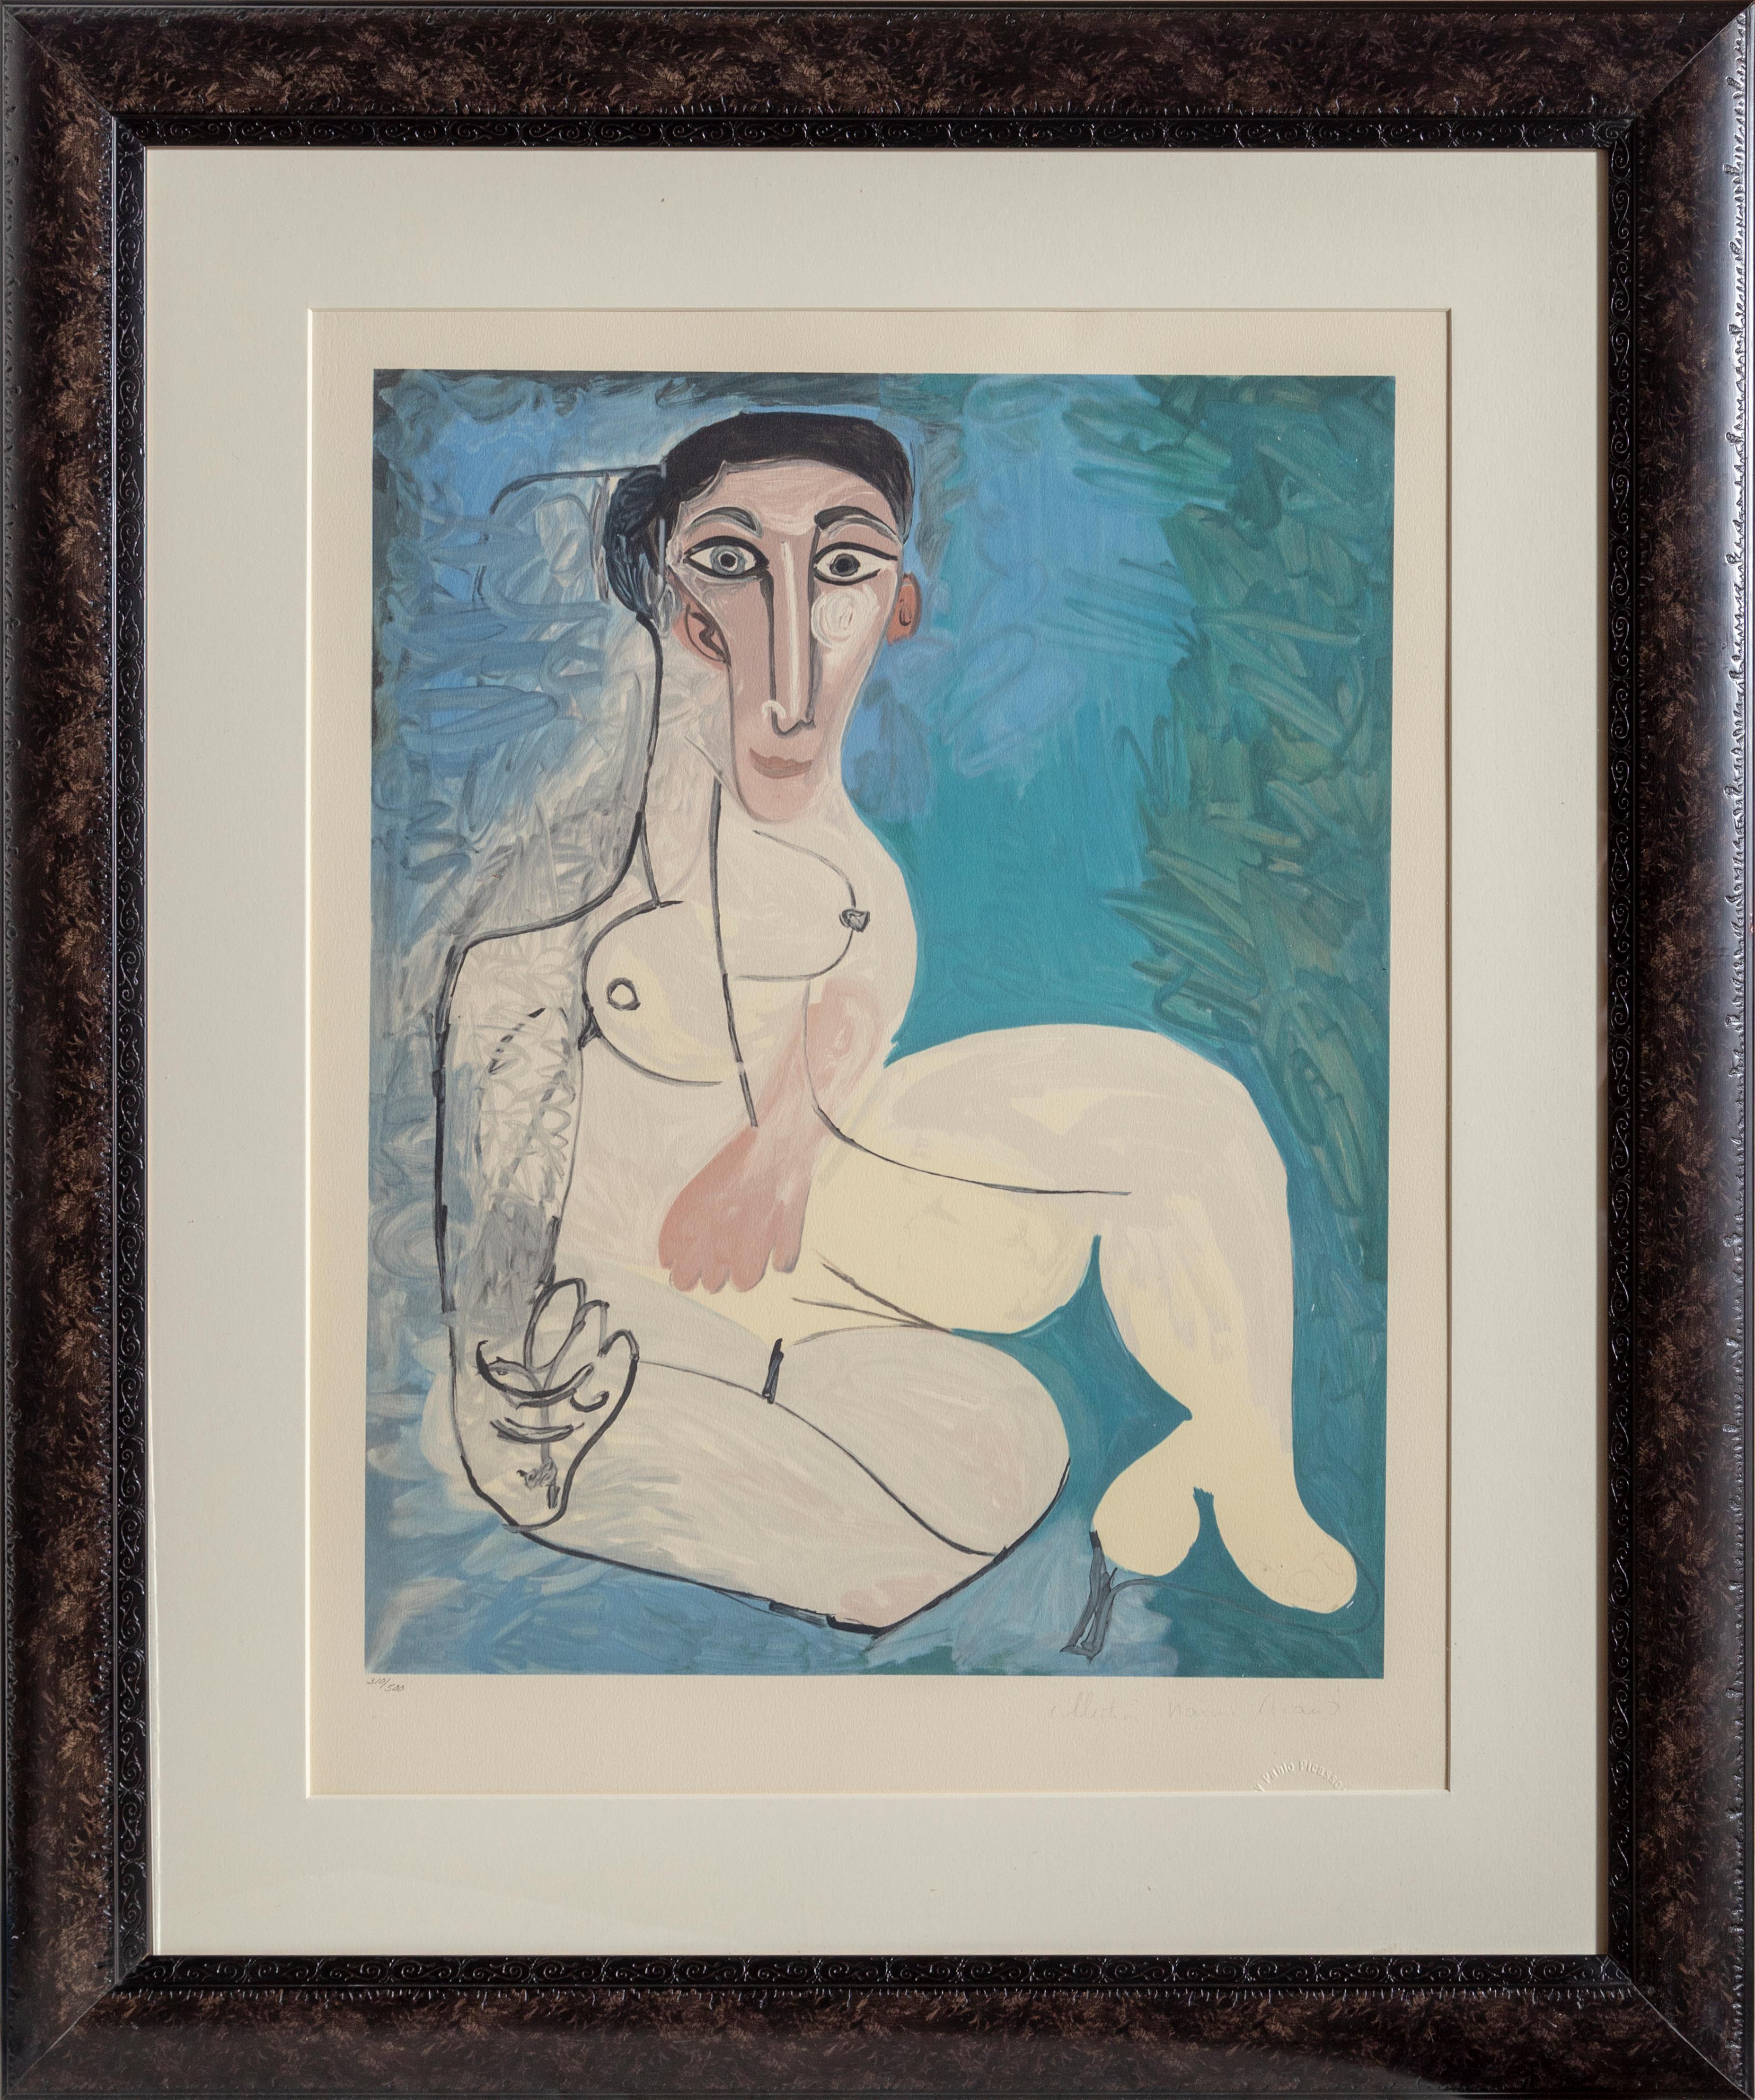 A lithograph from the Marina Picasso Estate Collection after the Pablo Picasso painting "Femme Nue Assise dans l'Herbe".  The original painting was completed in 1961. In the 1970's after Picasso's death, Marina Picasso, his granddaughter, authorized